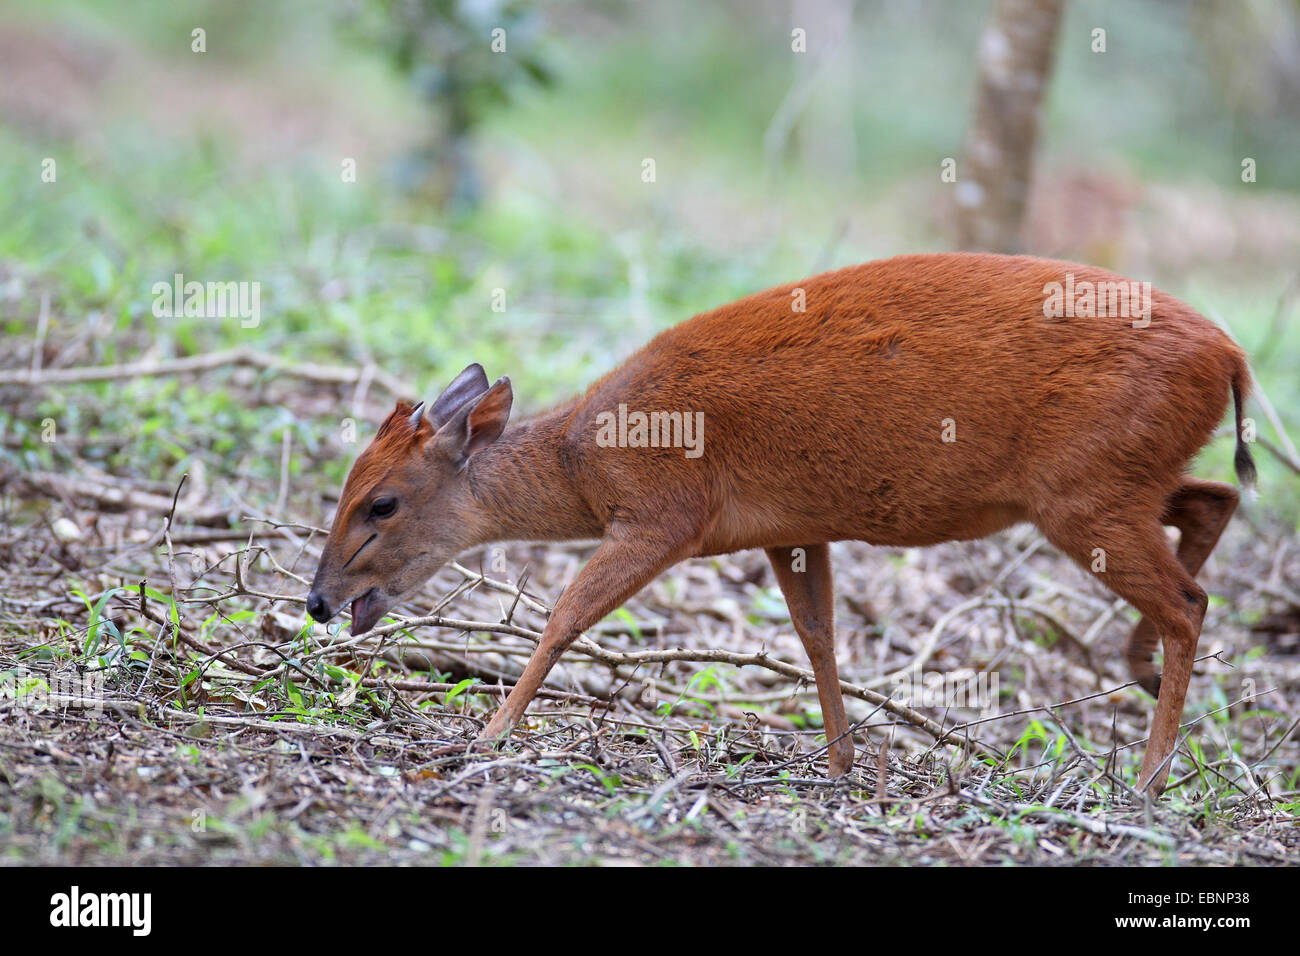 red forest duiker (Cephalophus natalensis), looks for food in a wood, South Africa, iSimangaliso Wetland Park Stock Photo